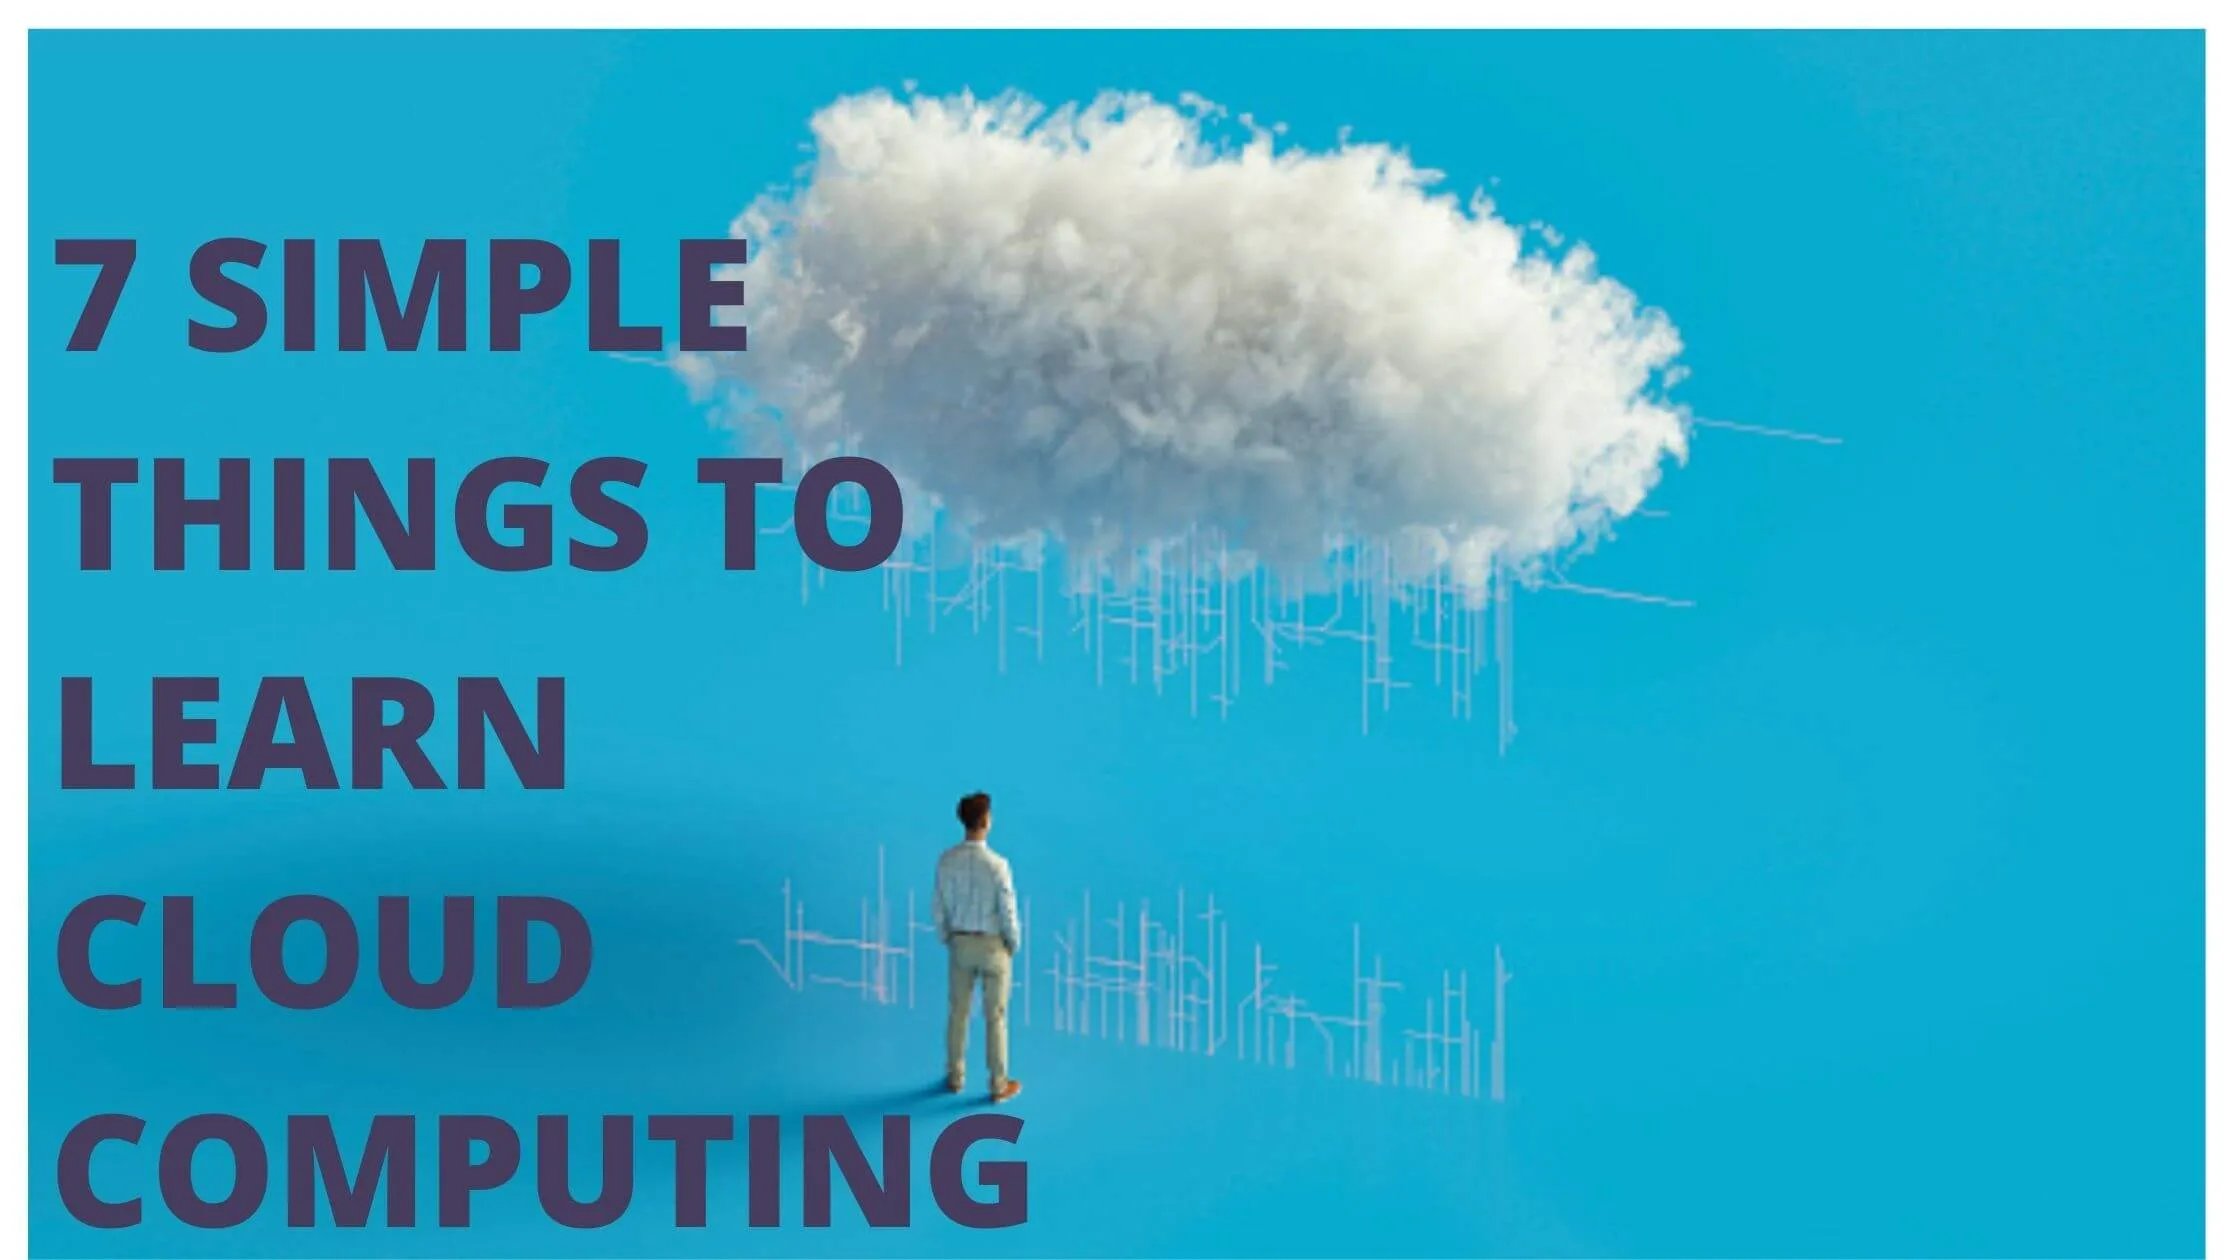 7 Simple Things You Can Do to Learn cloud computing